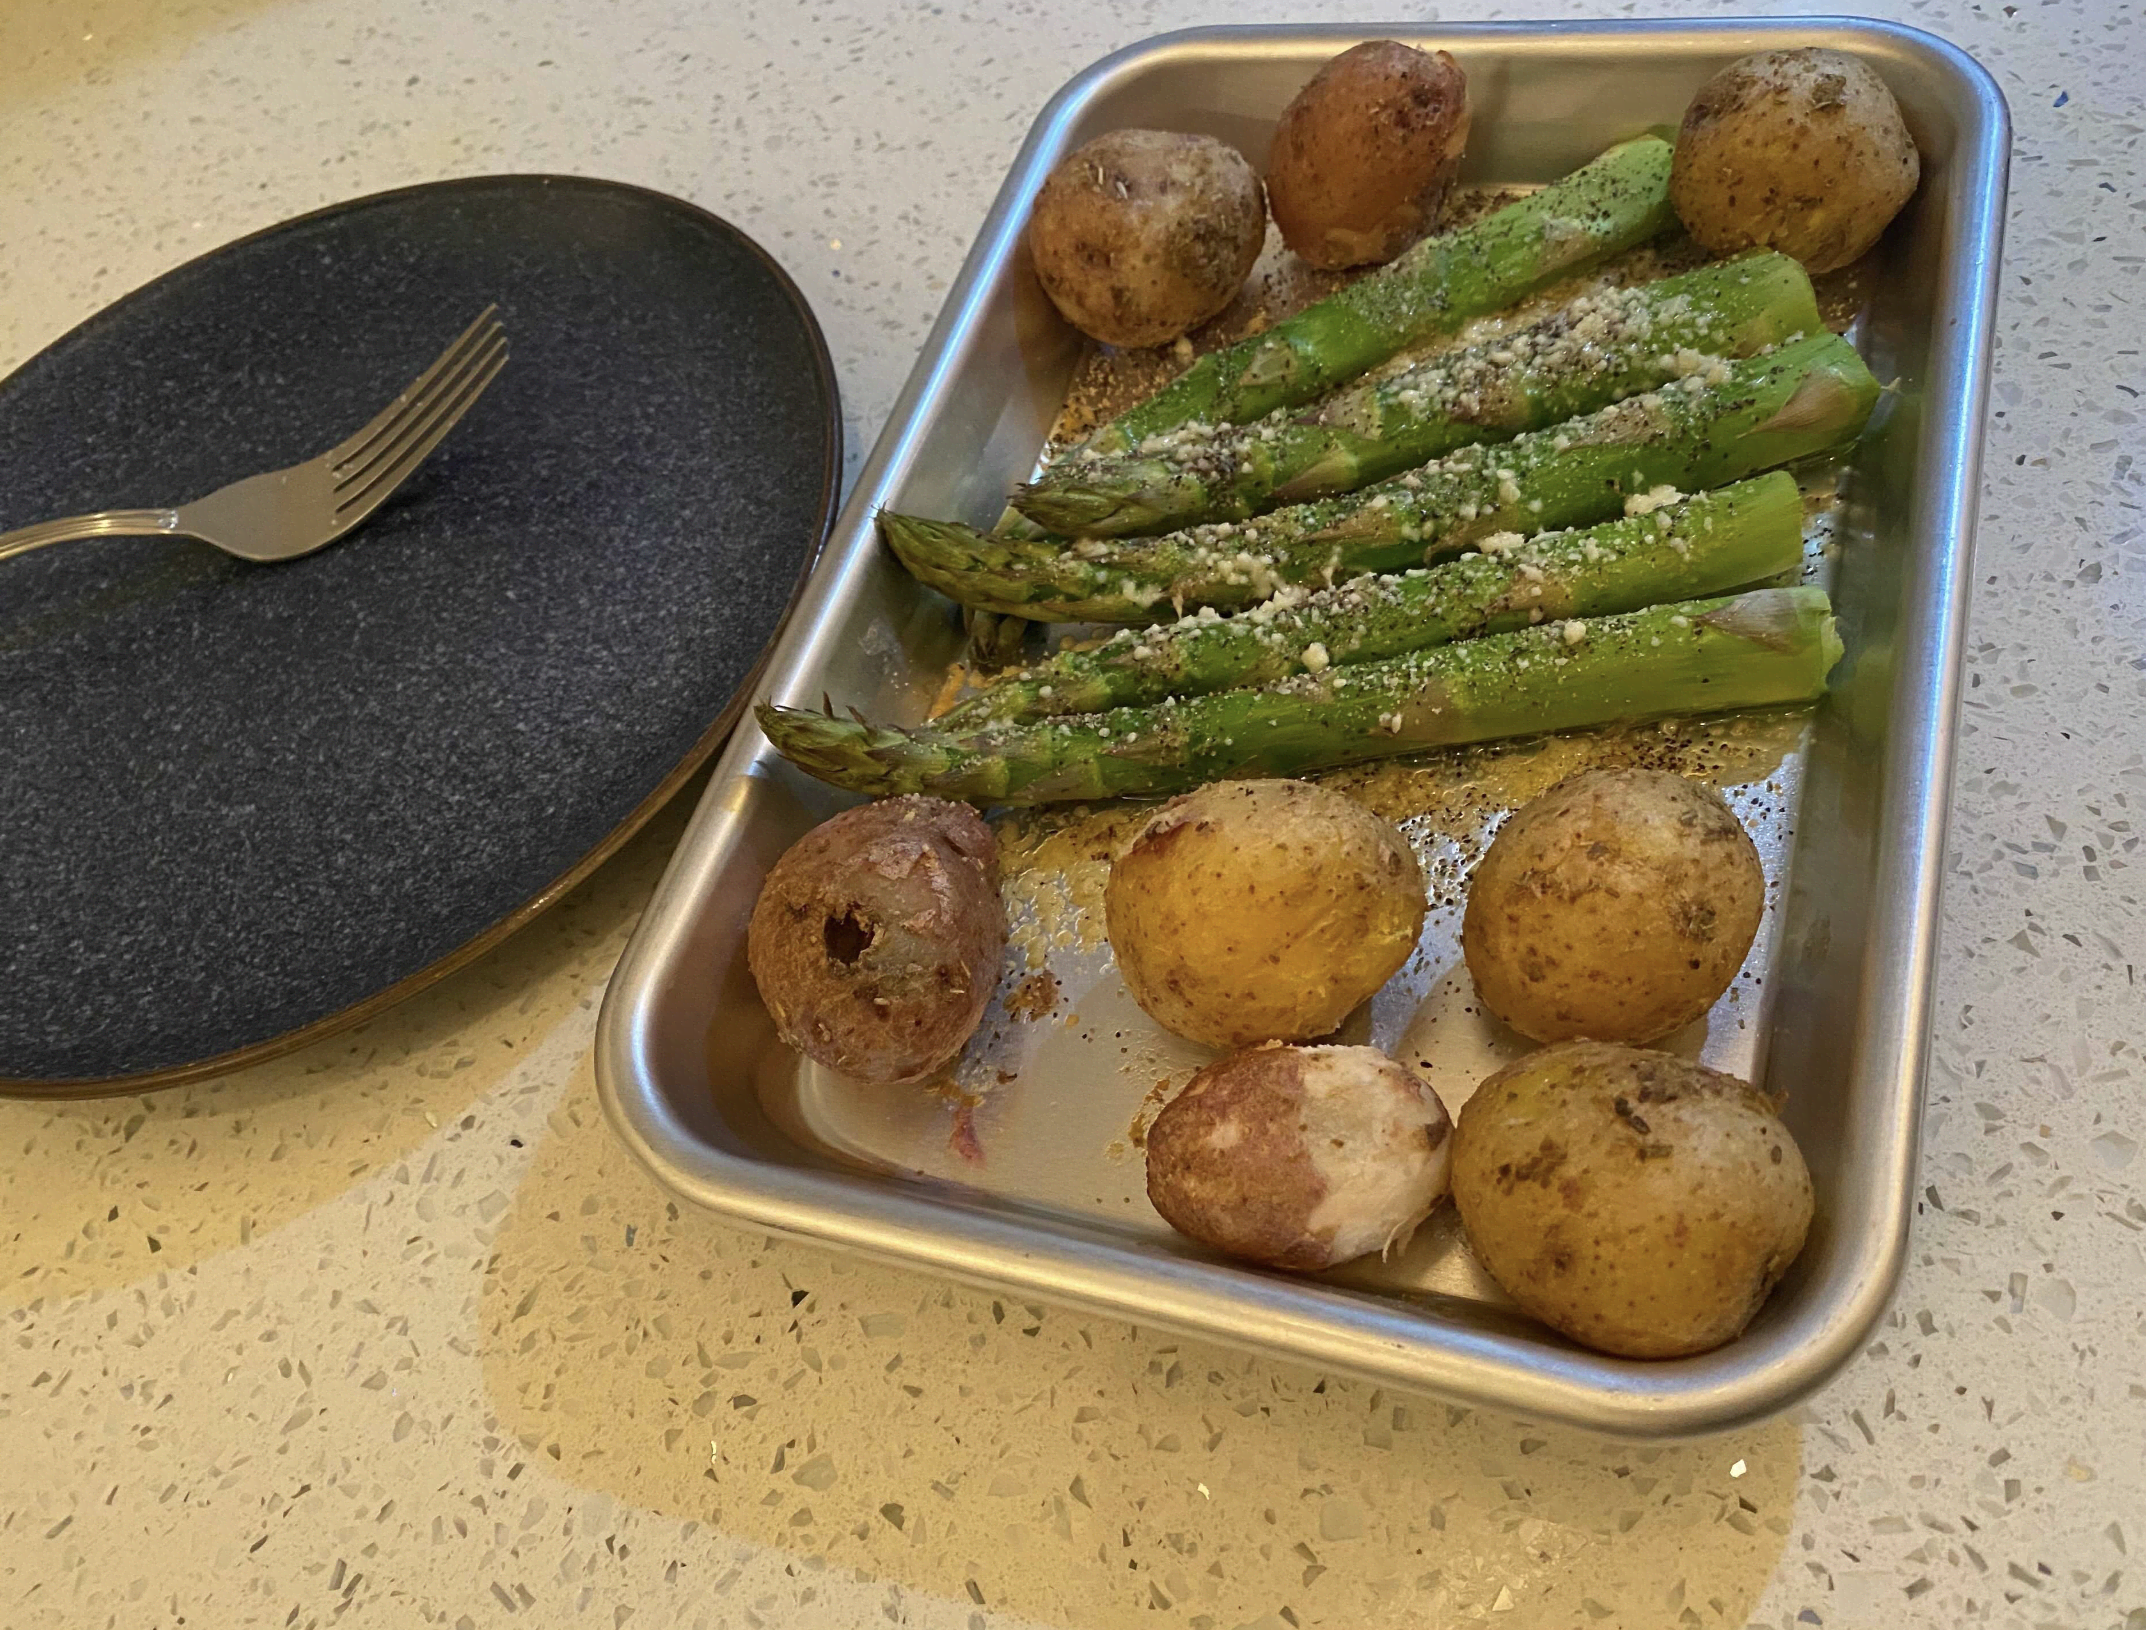 Nordic Ware Sheet Pan Review for Quick Meals and Easy Cleanups